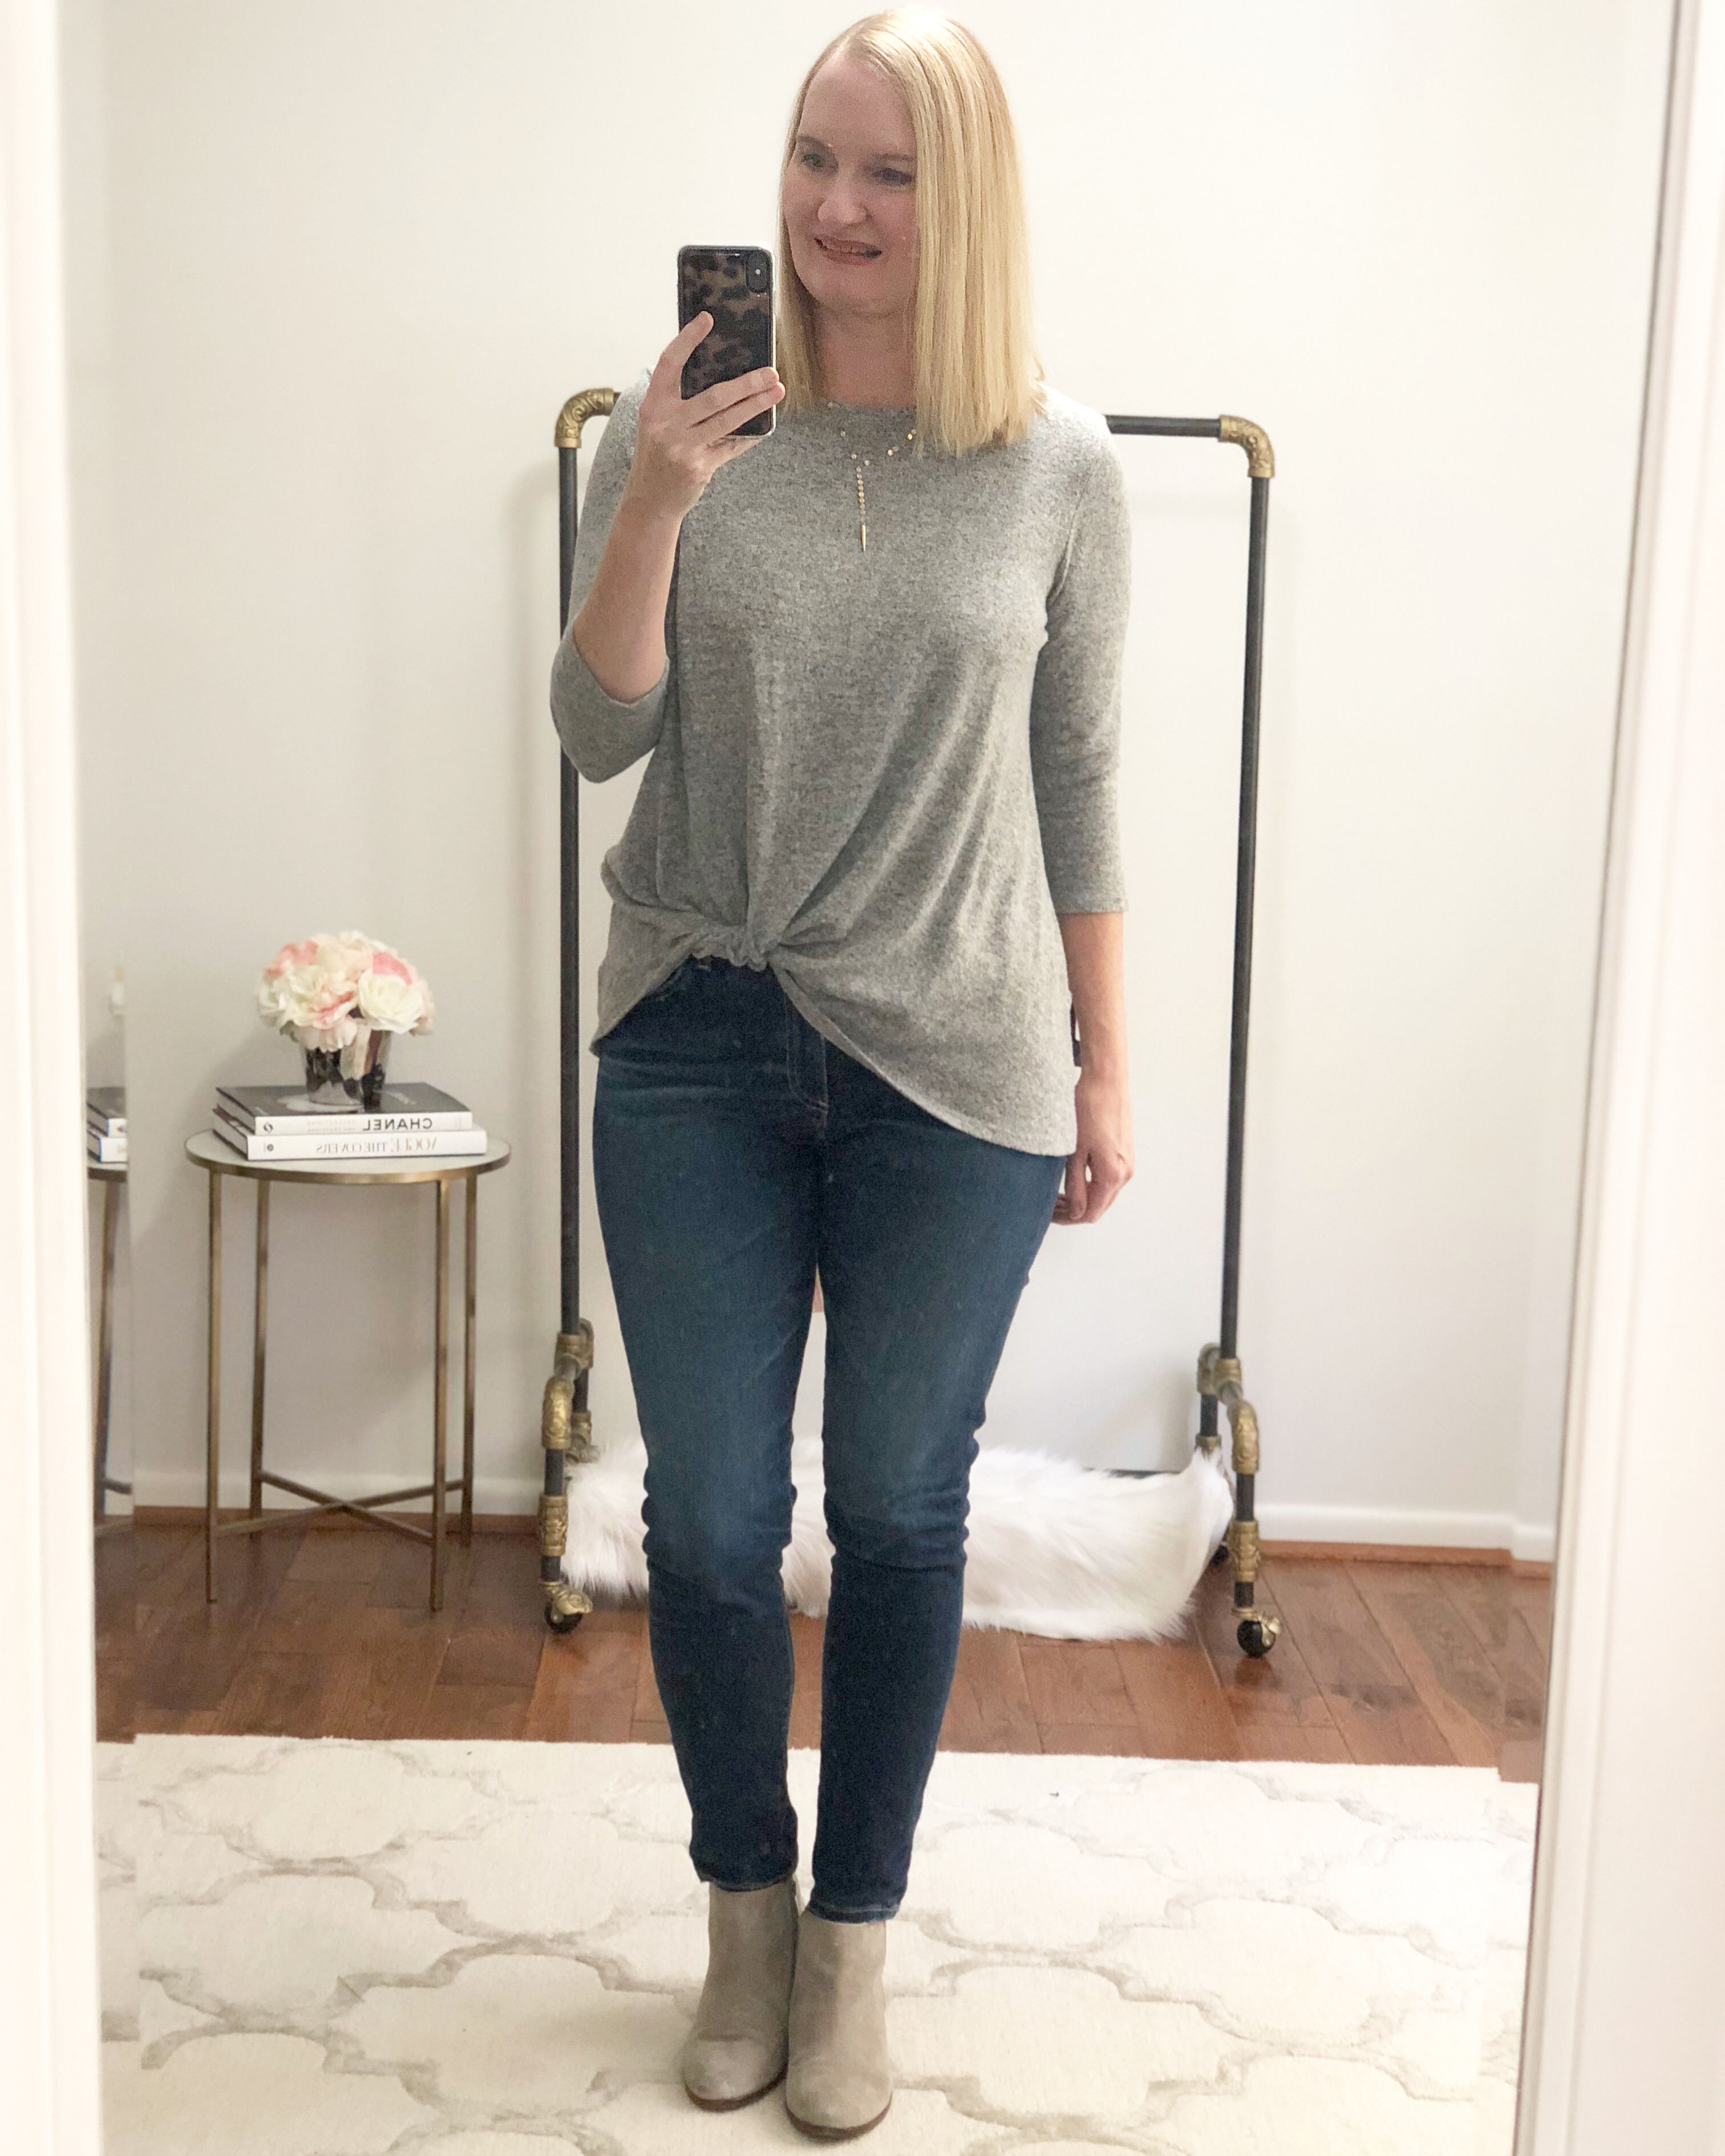 10x10 Challenge Fall 2018 - Outfit 9